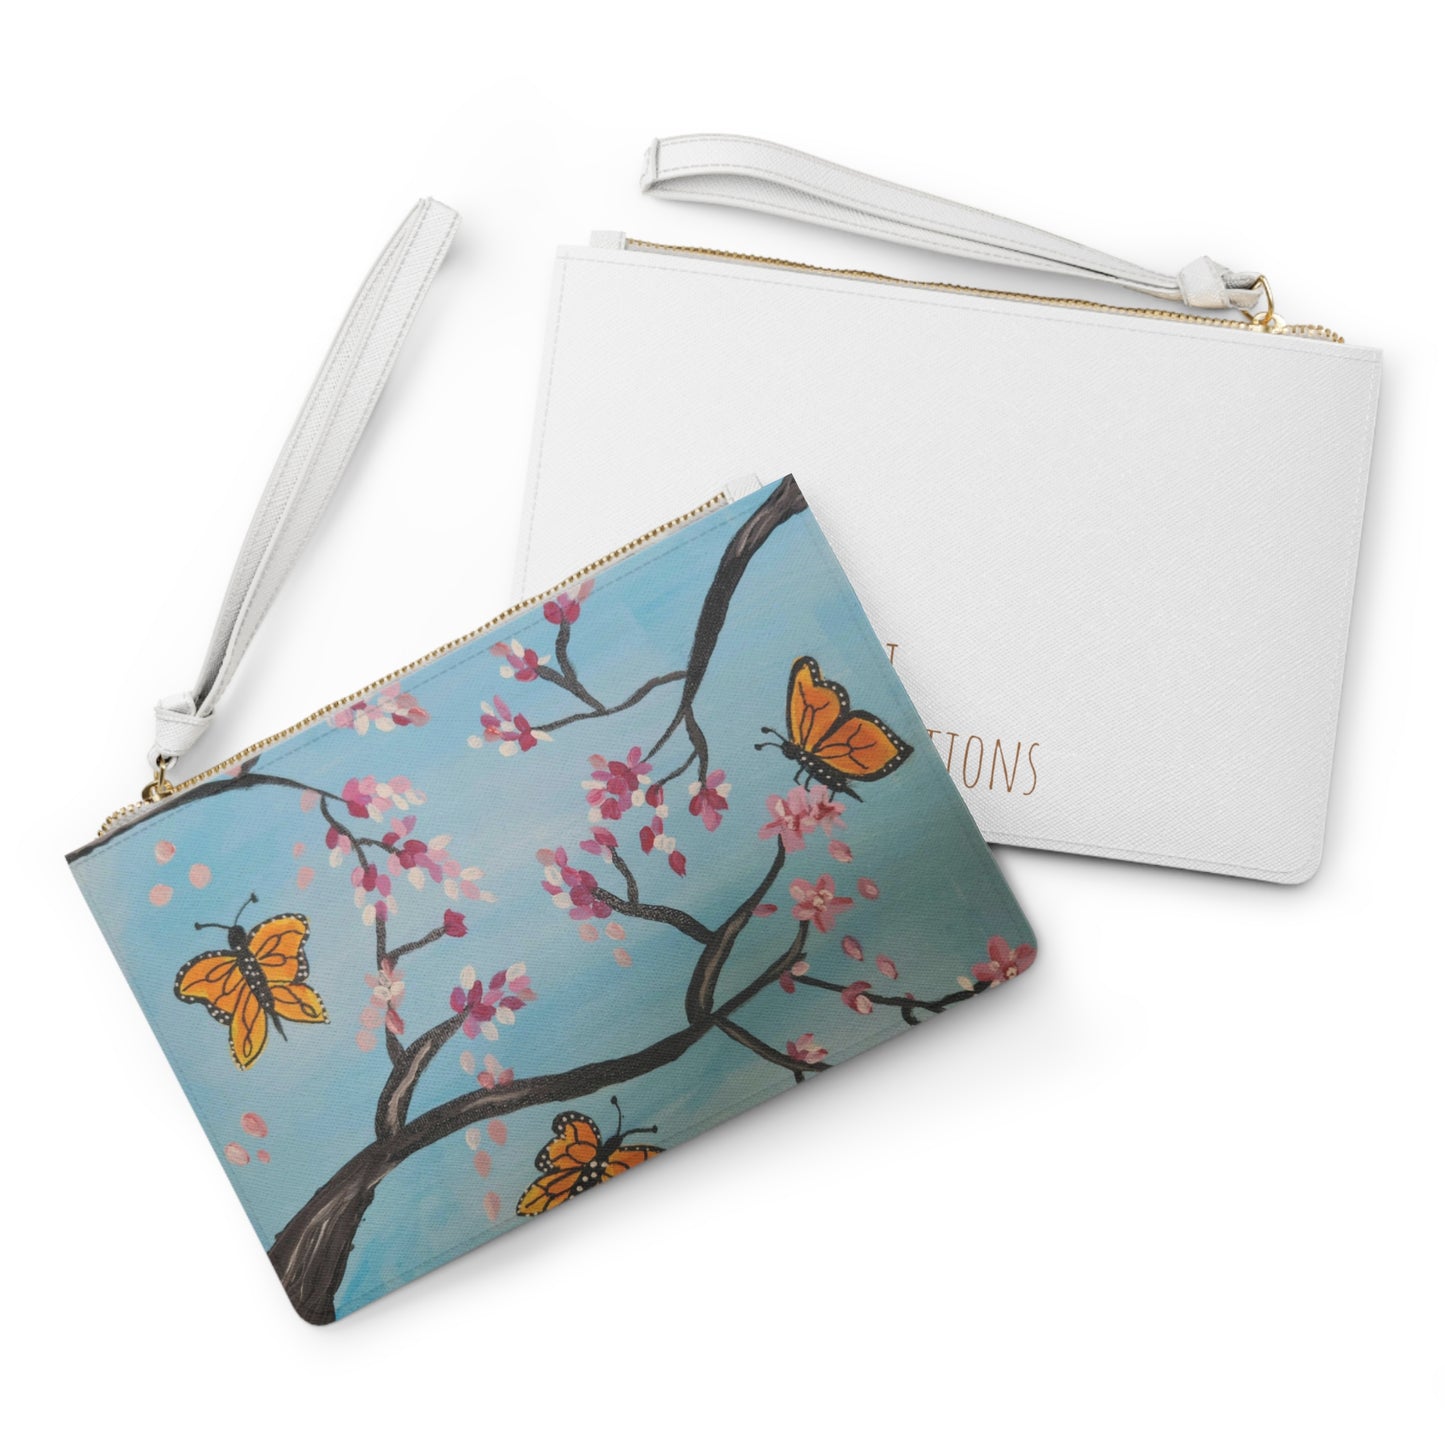 Monarchs Play Large Clutch Bag (Brookson Collection)